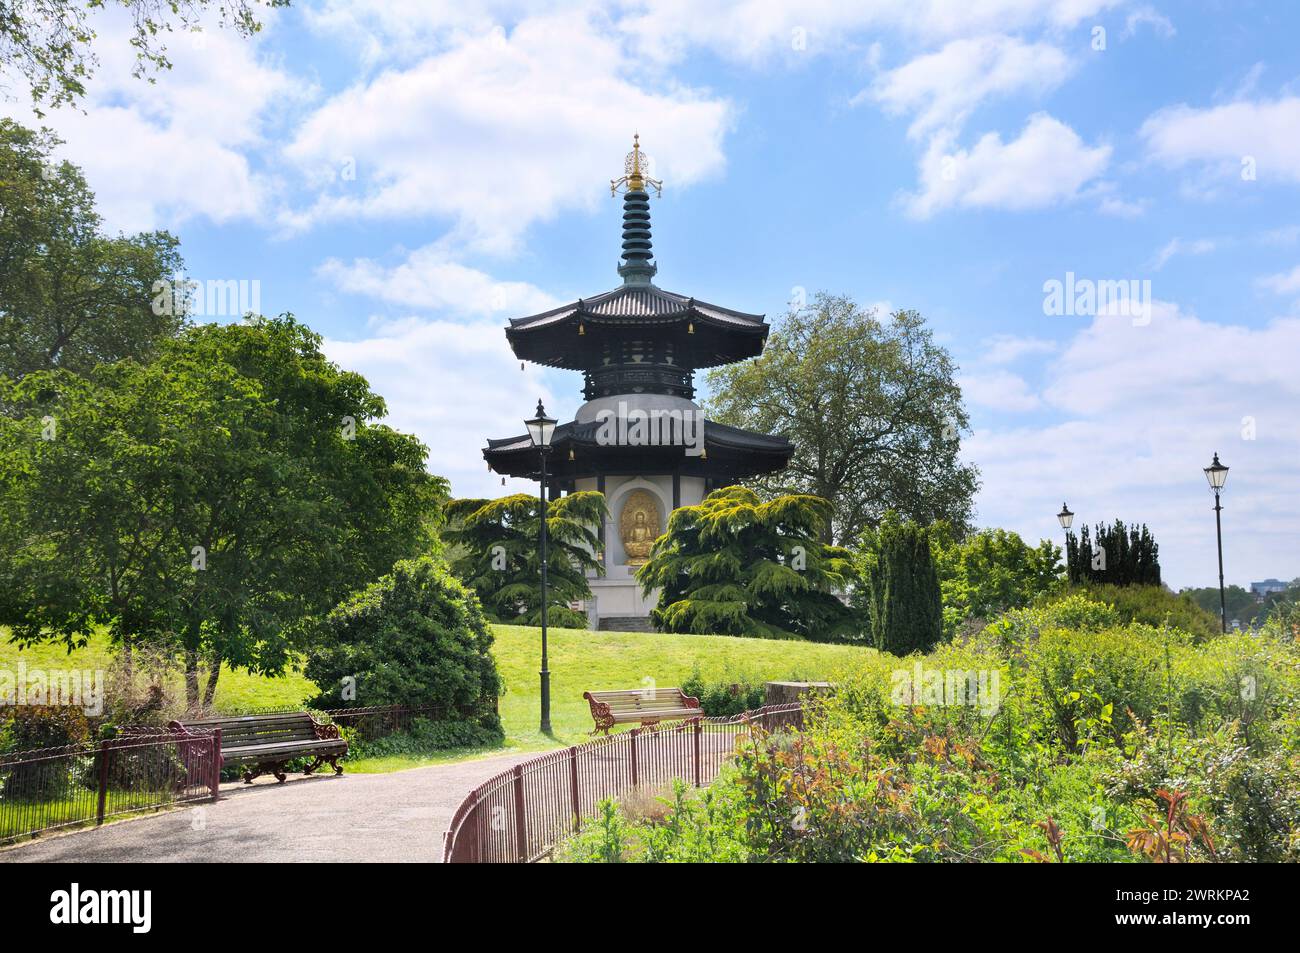 London Peace Pagoda in a sunny Battersea Park, London Borough of Wandsworth, UK. Traditional Japanese Buddhist temple. buildings, architecture. Stock Photo